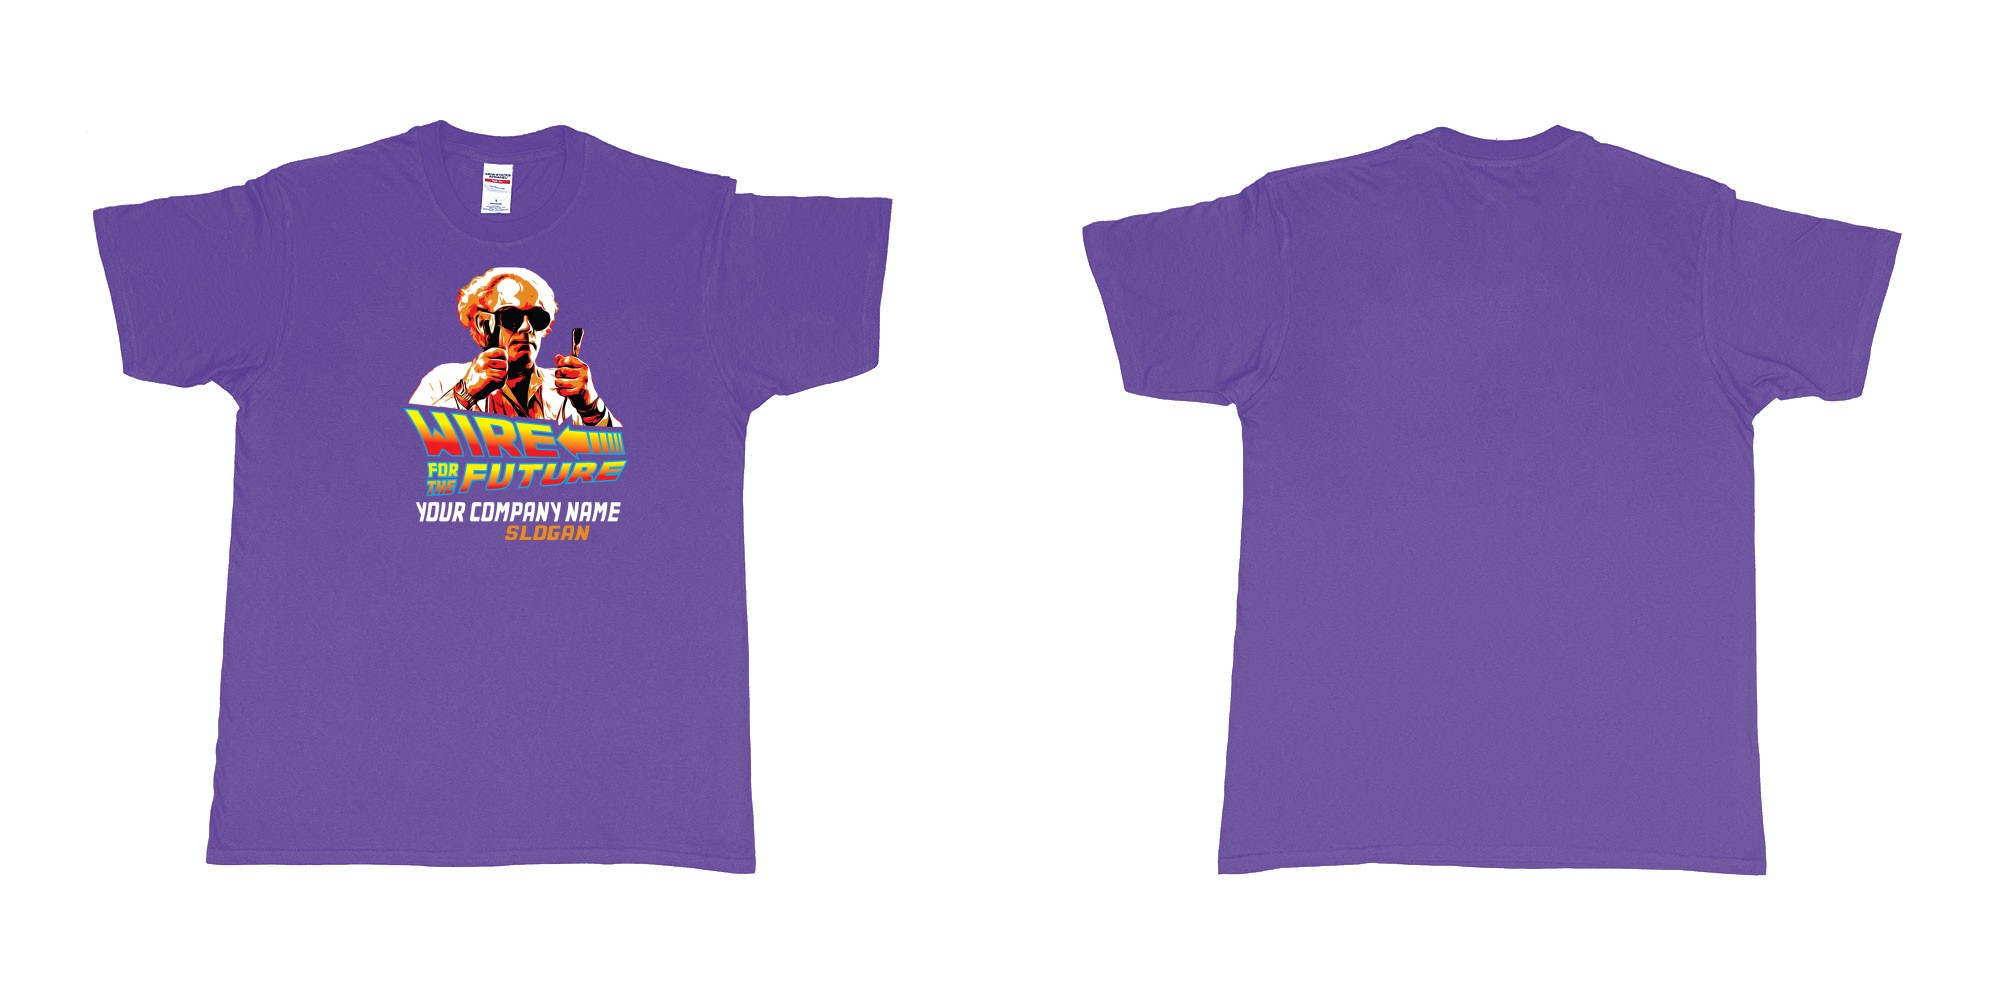 Custom tshirt design wire for the future back to the future electrician sparky in fabric color purple choice your own text made in Bali by The Pirate Way